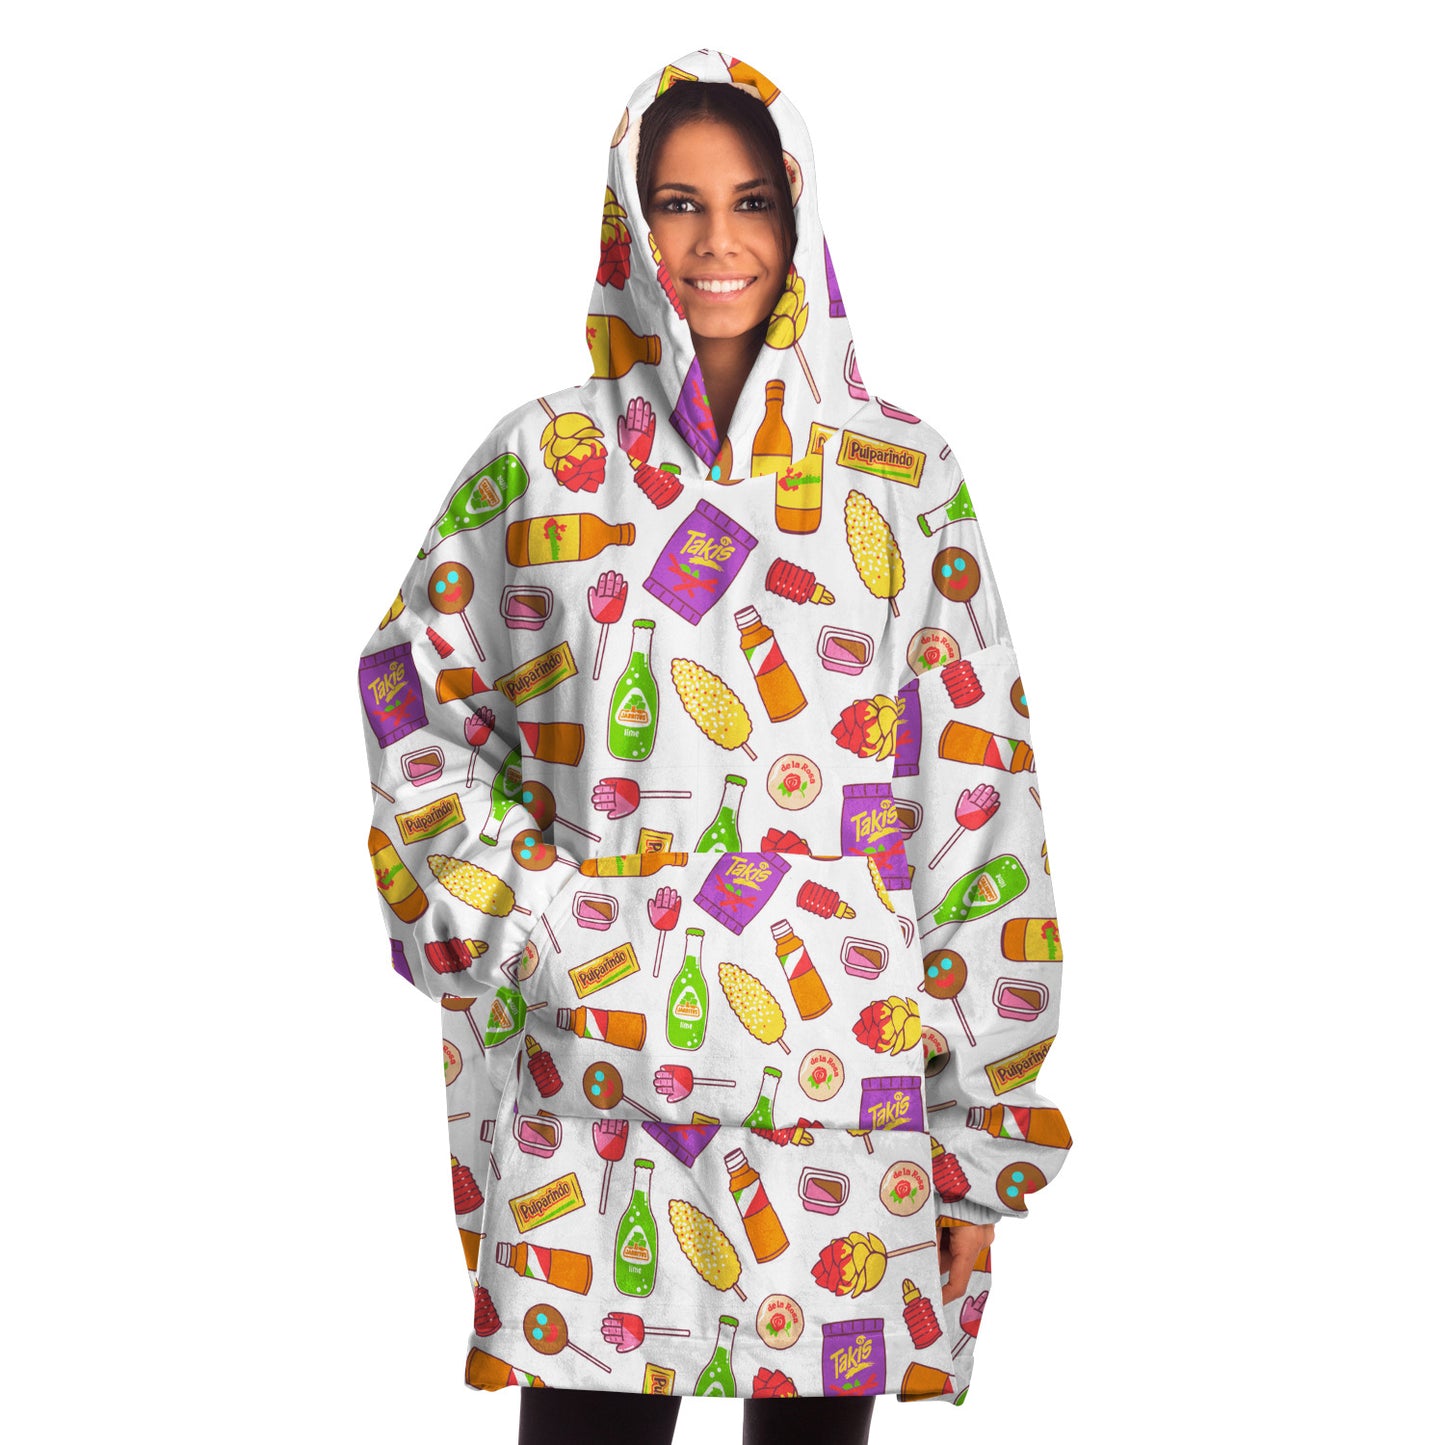 Mexican snacks Snug Hoodie blanket for mexican family or latin friend